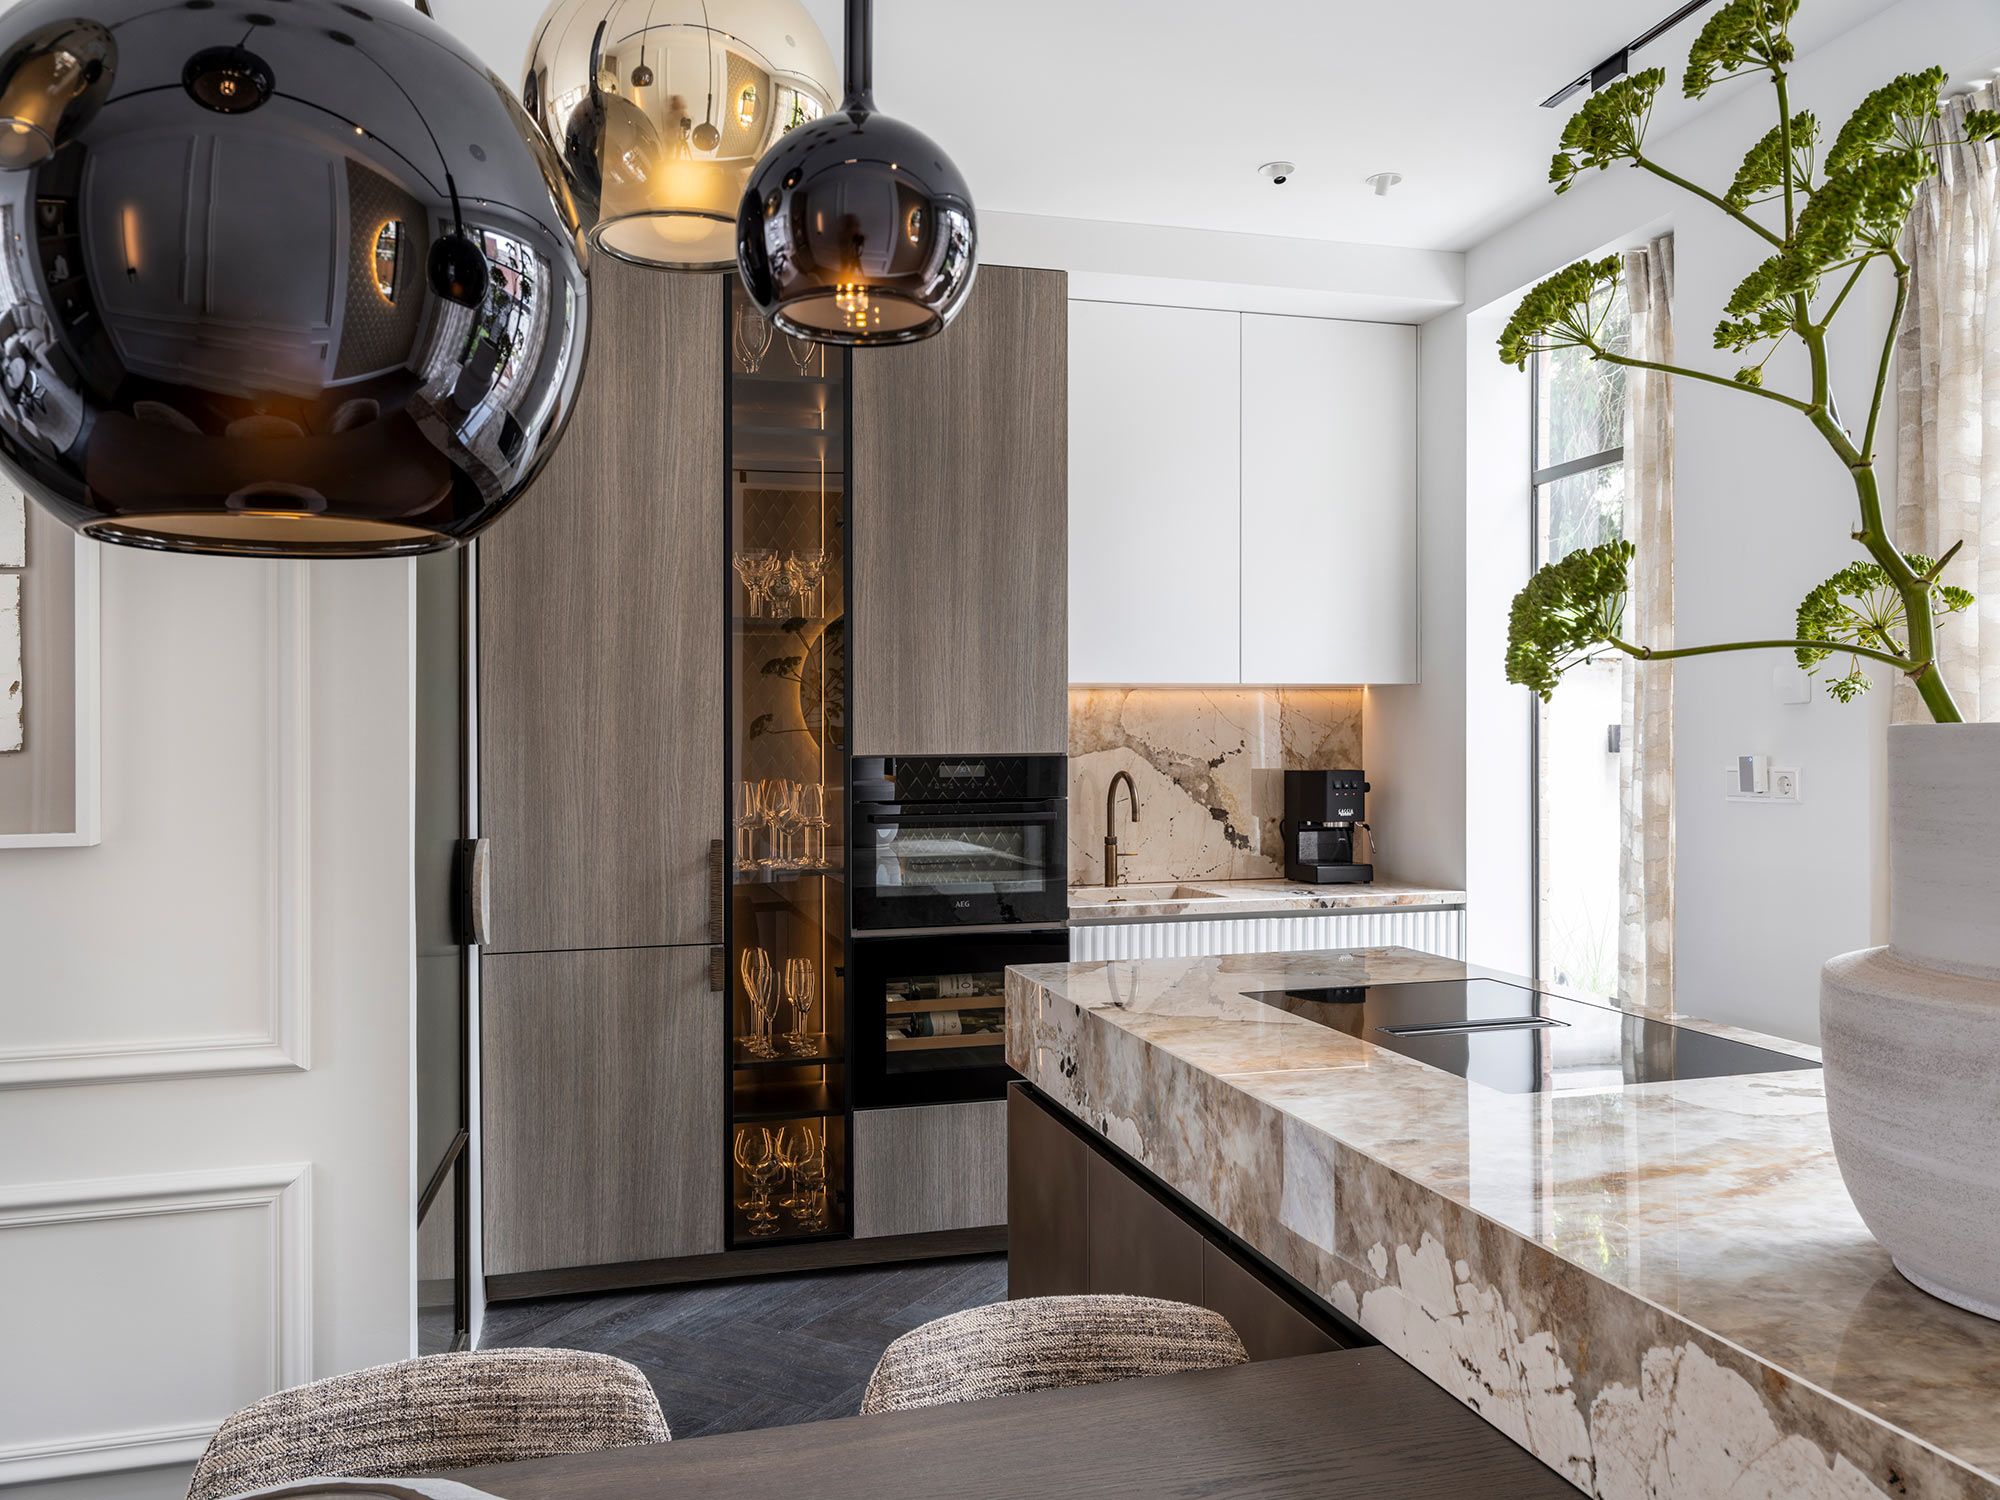 Image of 18 Studio Zuyd mei 2023 DZ in A Mediterranean style home with a contemporary character thanks to Dekton - Cosentino